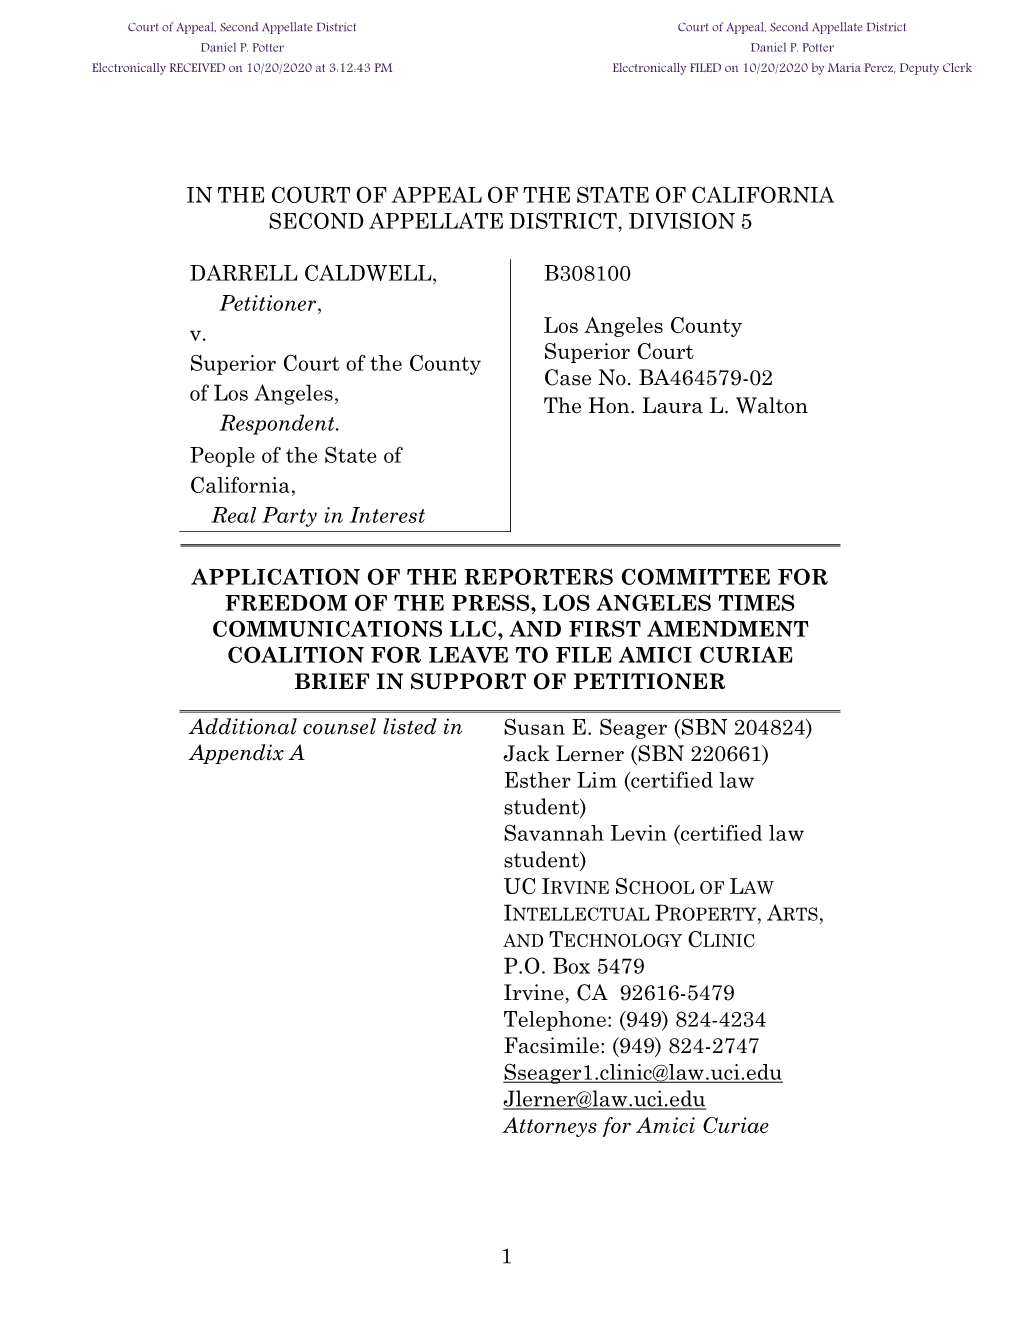 1 in the COURT of APPEAL of the STATE of CALIFORNIA SECOND APPELLATE DISTRICT, DIVISION 5 DARRELL CALDWELL, Petitioner, V. Supe